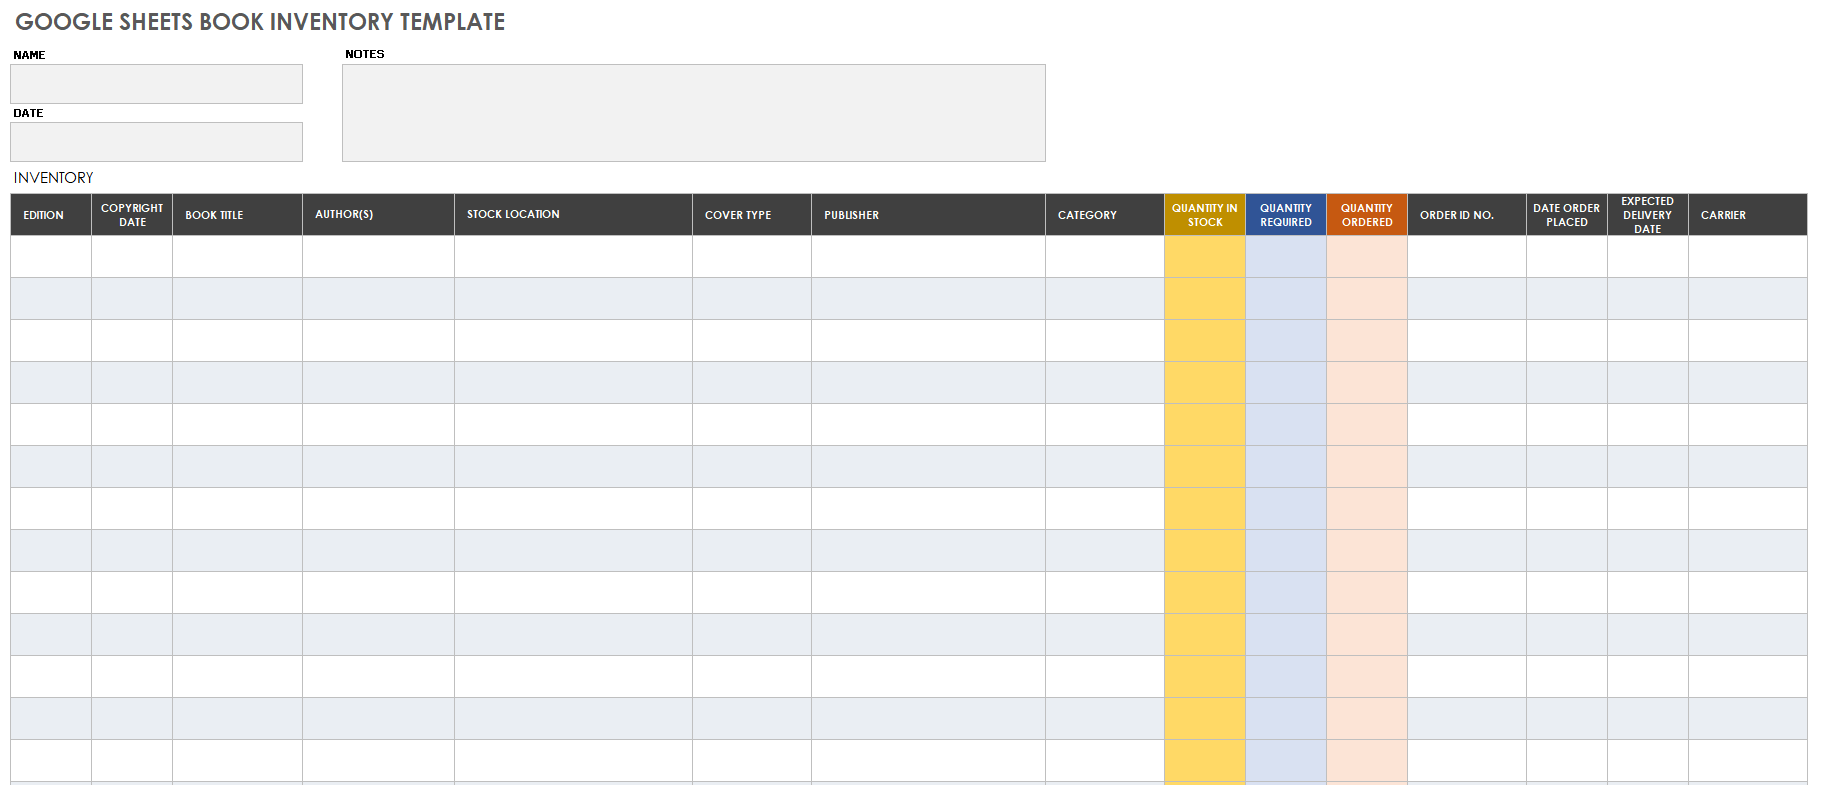 Google Sheets Book Inventory Template